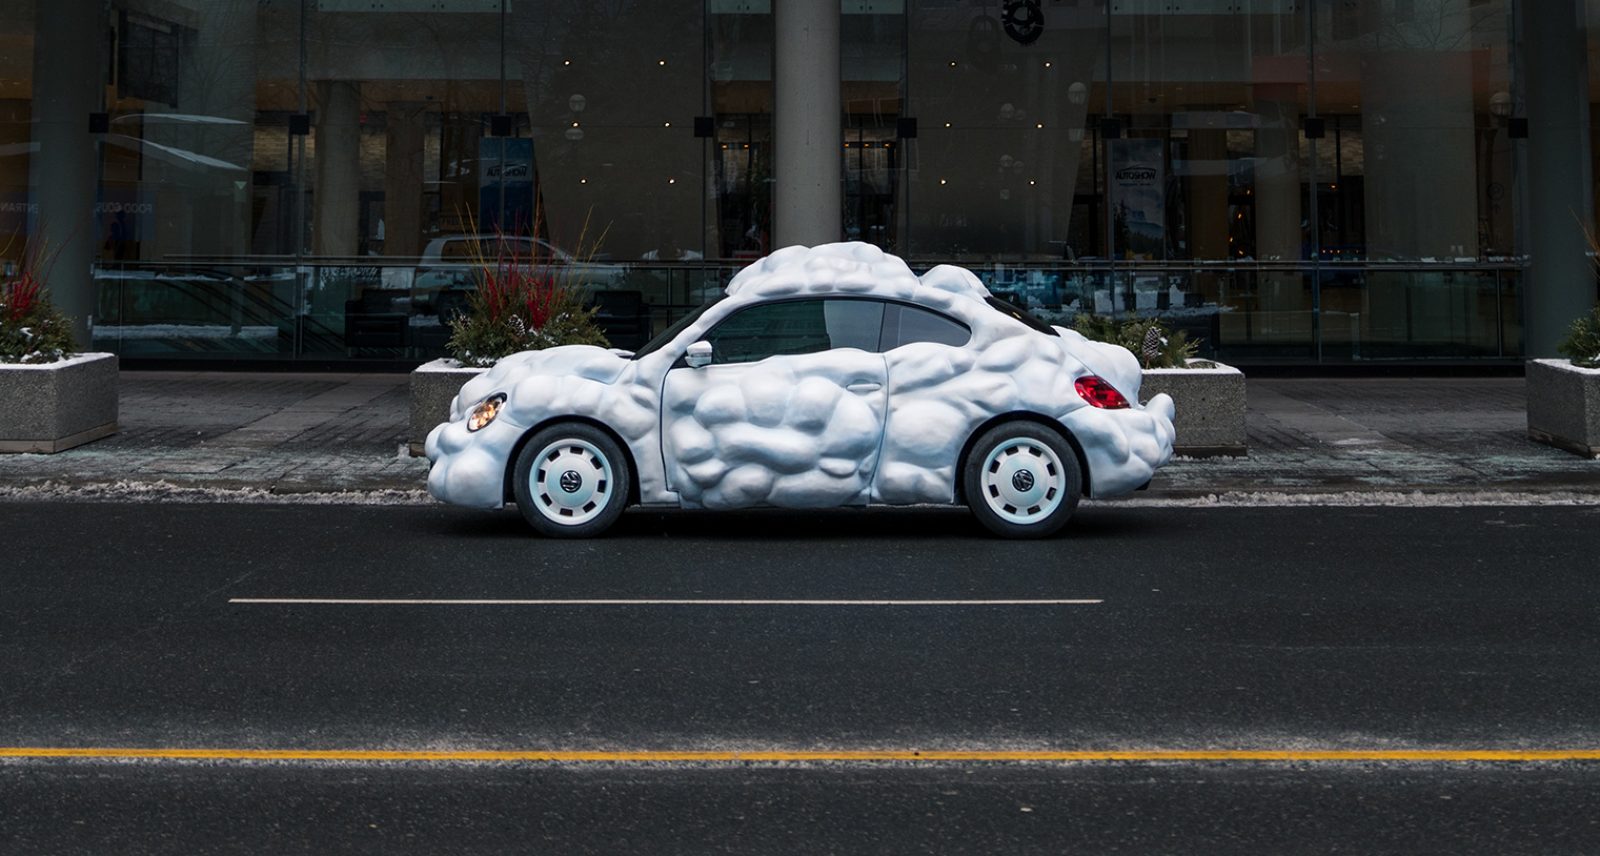 Onlia’s Cloud Car Proves This Year’s Most Innovative Car Safety Feature is You